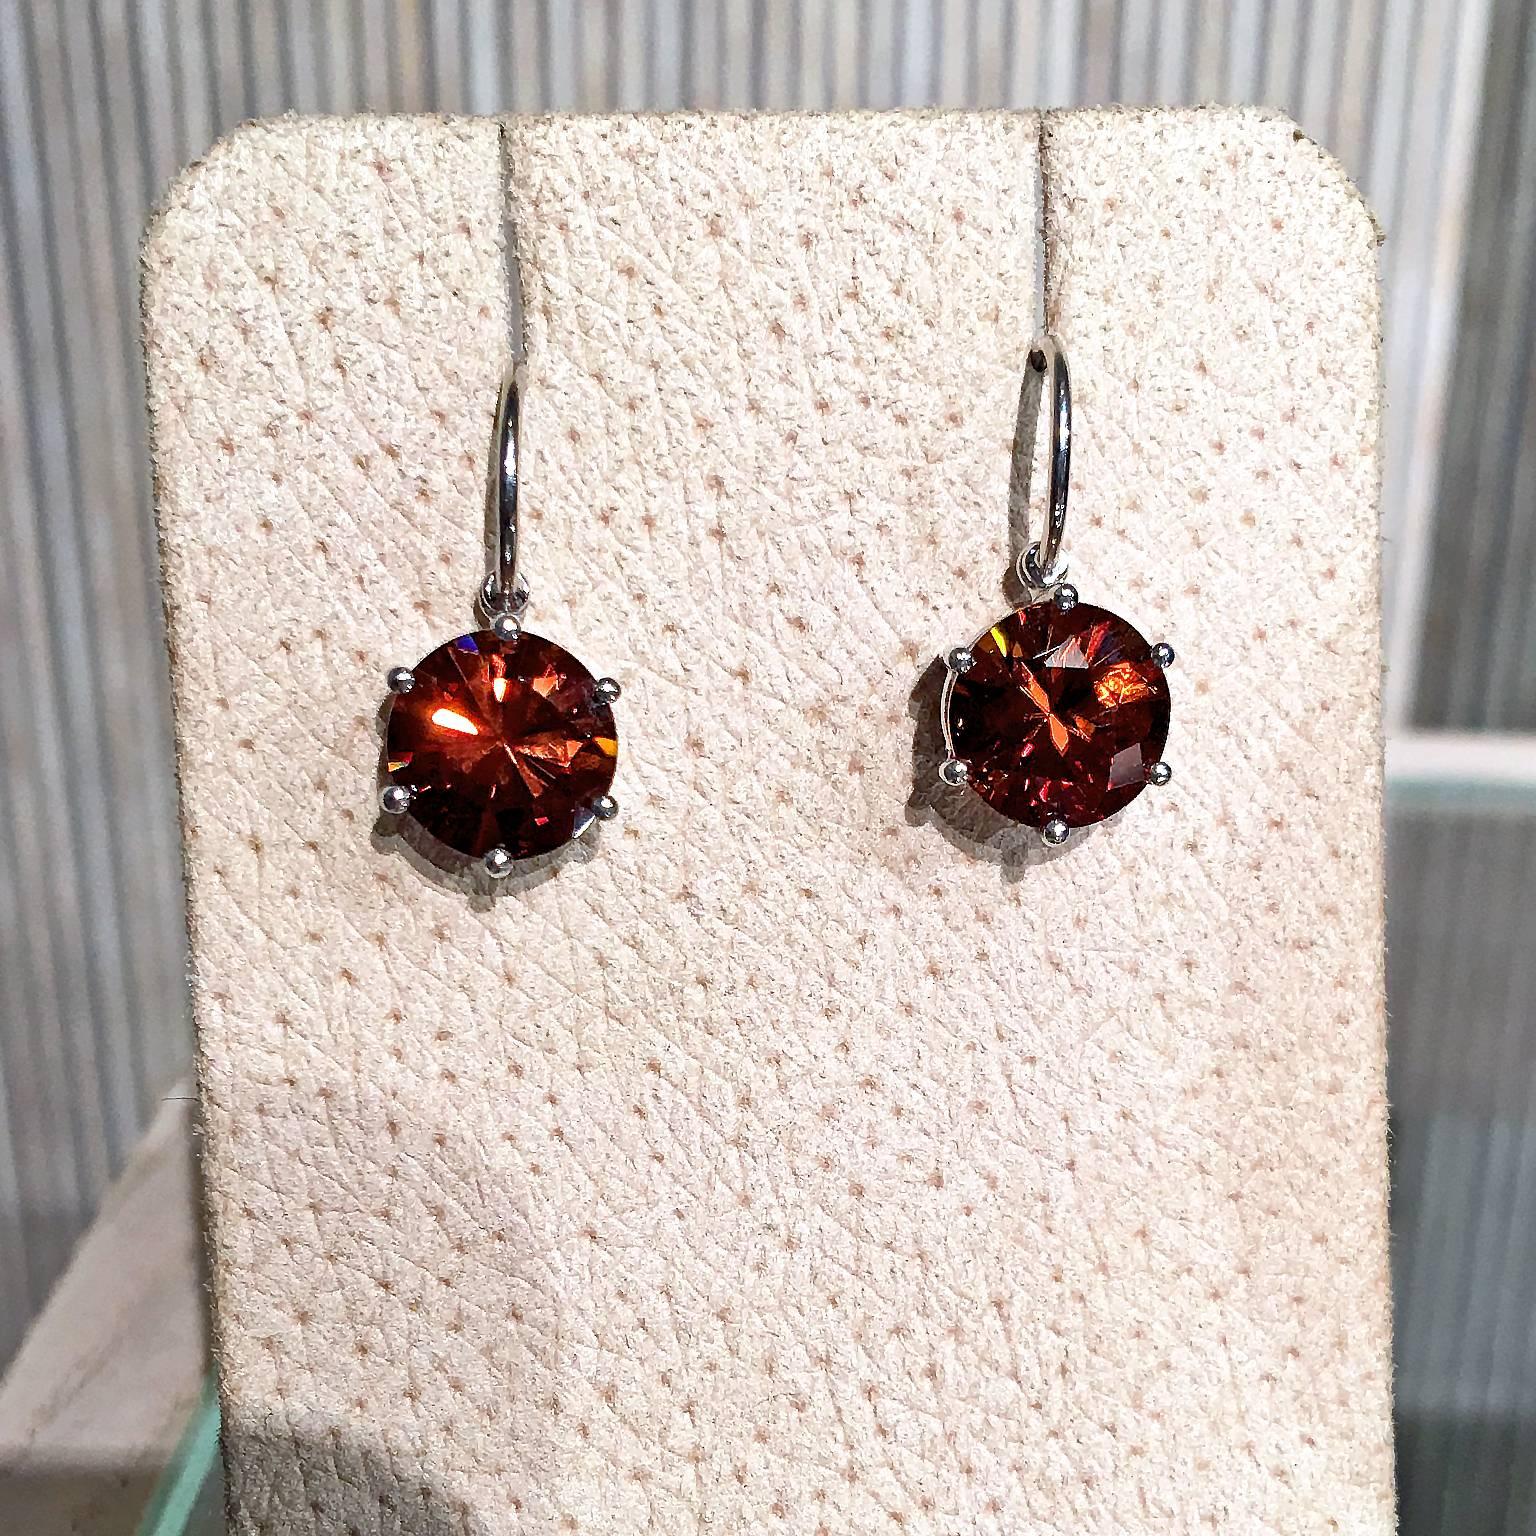 One of a Kind Princess Earrings handcrafted in Germany by master metalsmith and award winning jewelry artist Erich Zimmermann in 18k white gold with a brilliant 9mm matched red zircon pair showcasing incredible fire.

Stamped 750 with Erich's